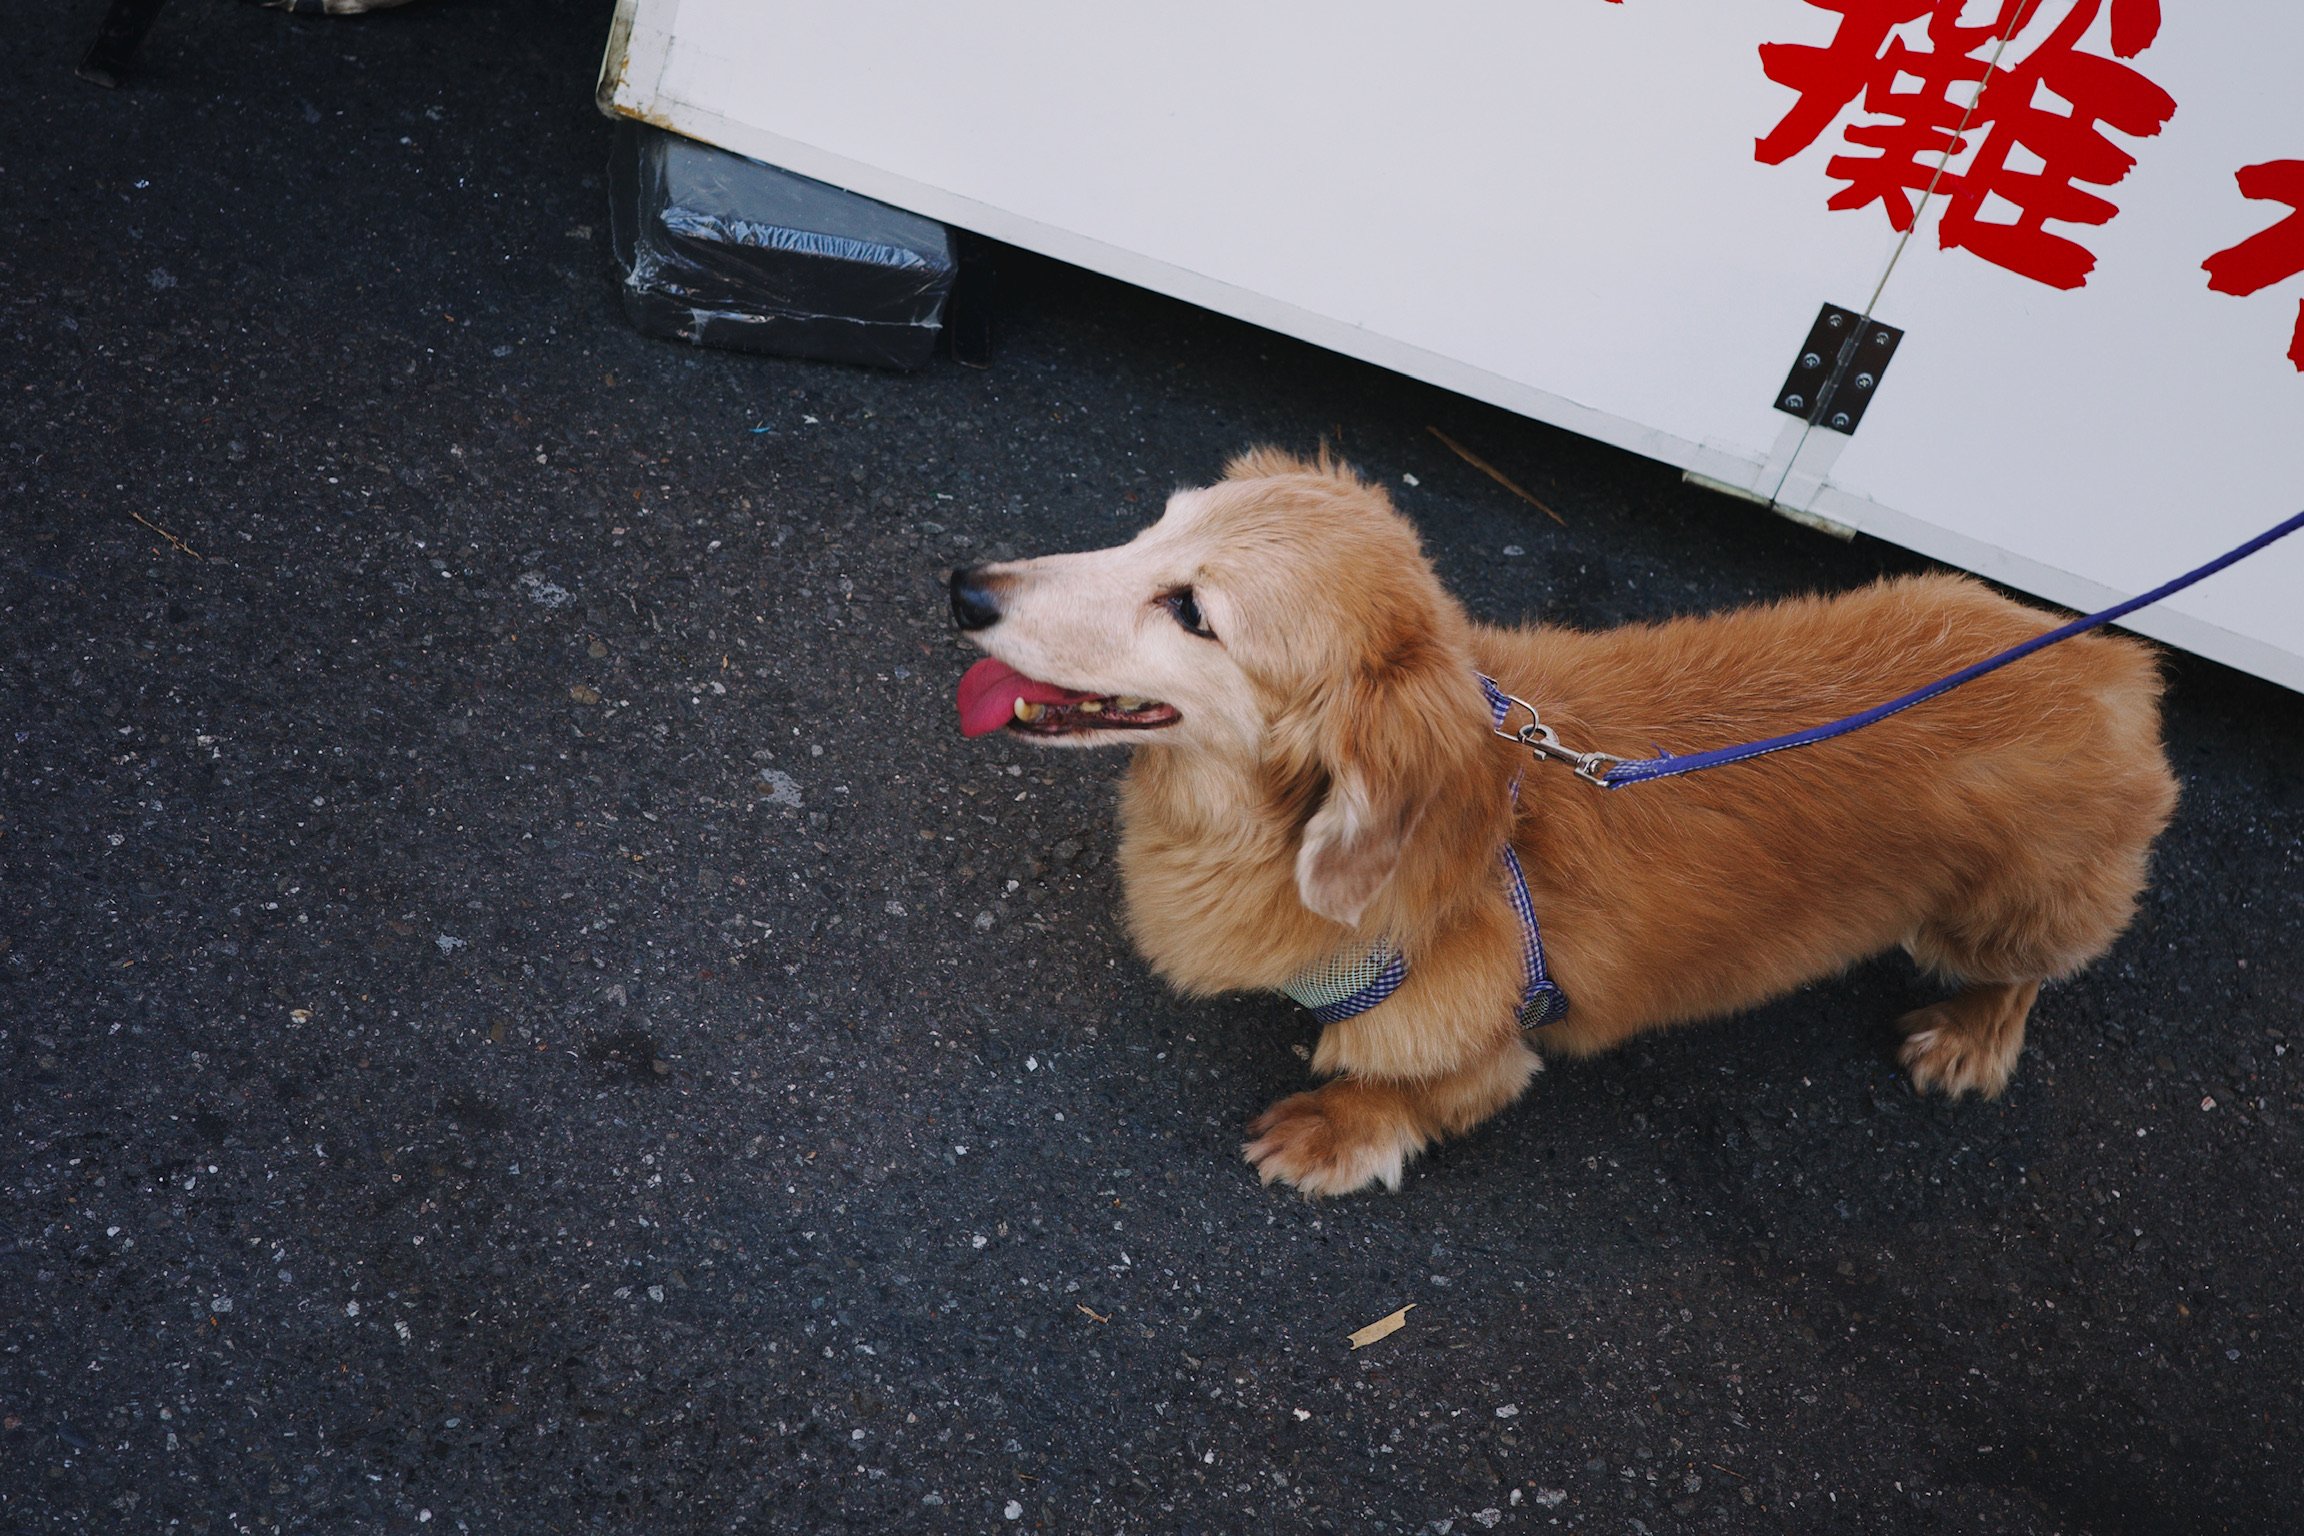 A small dog with its tongue out on bright blue leash.